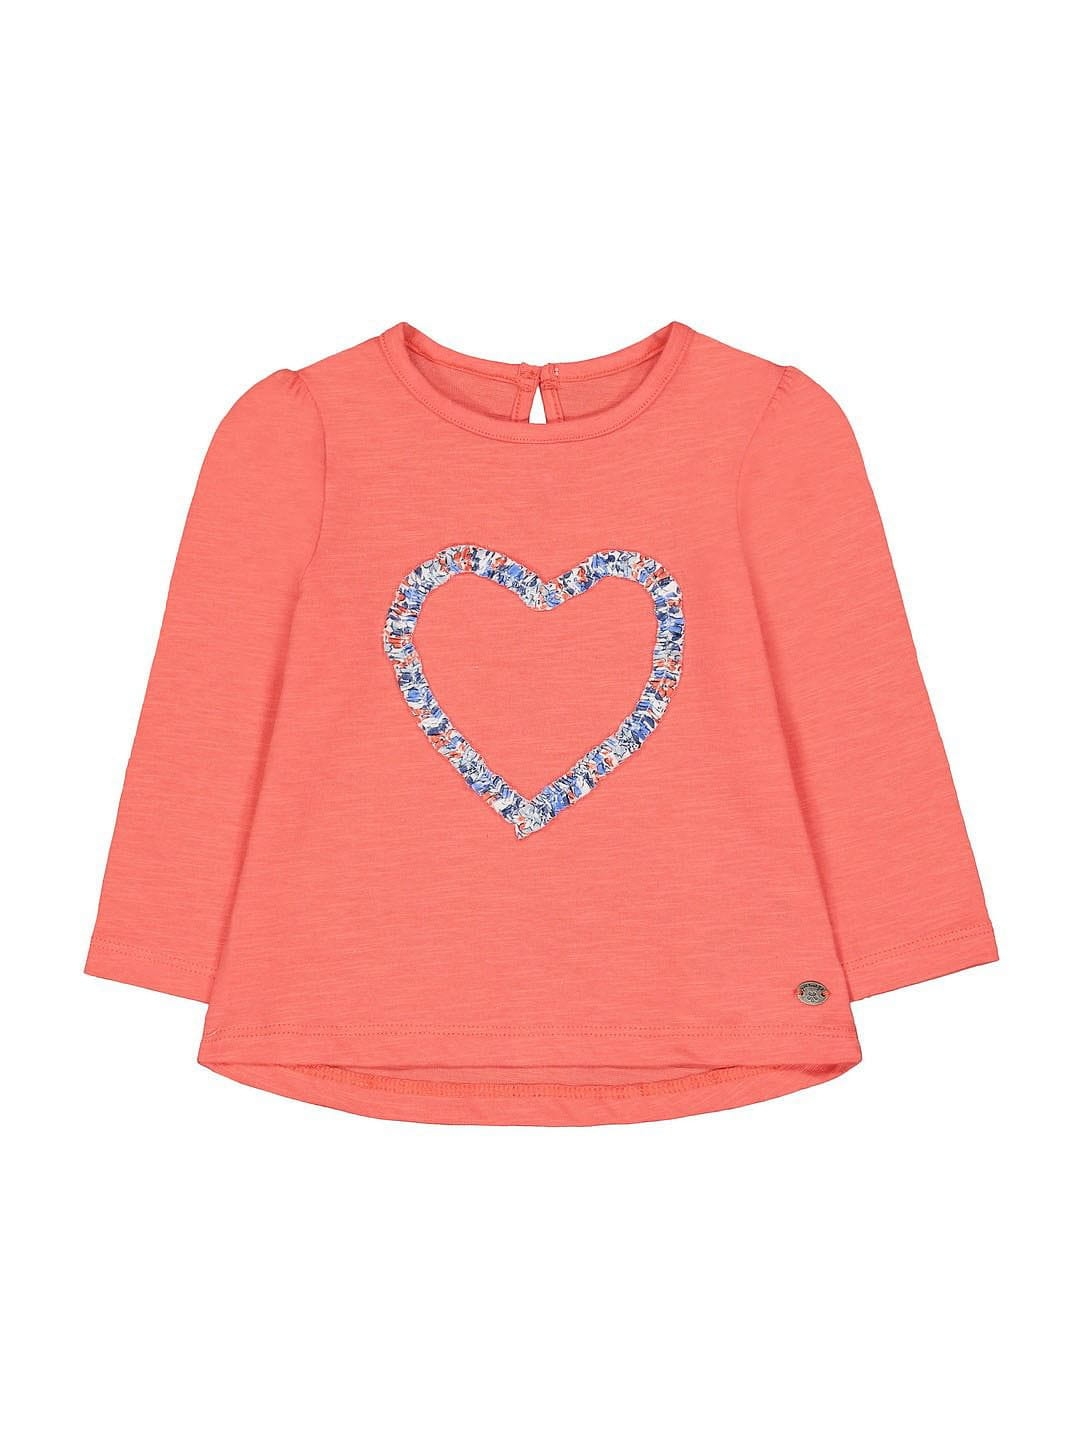 Mothercare | Coral Heart T-Shirt 0